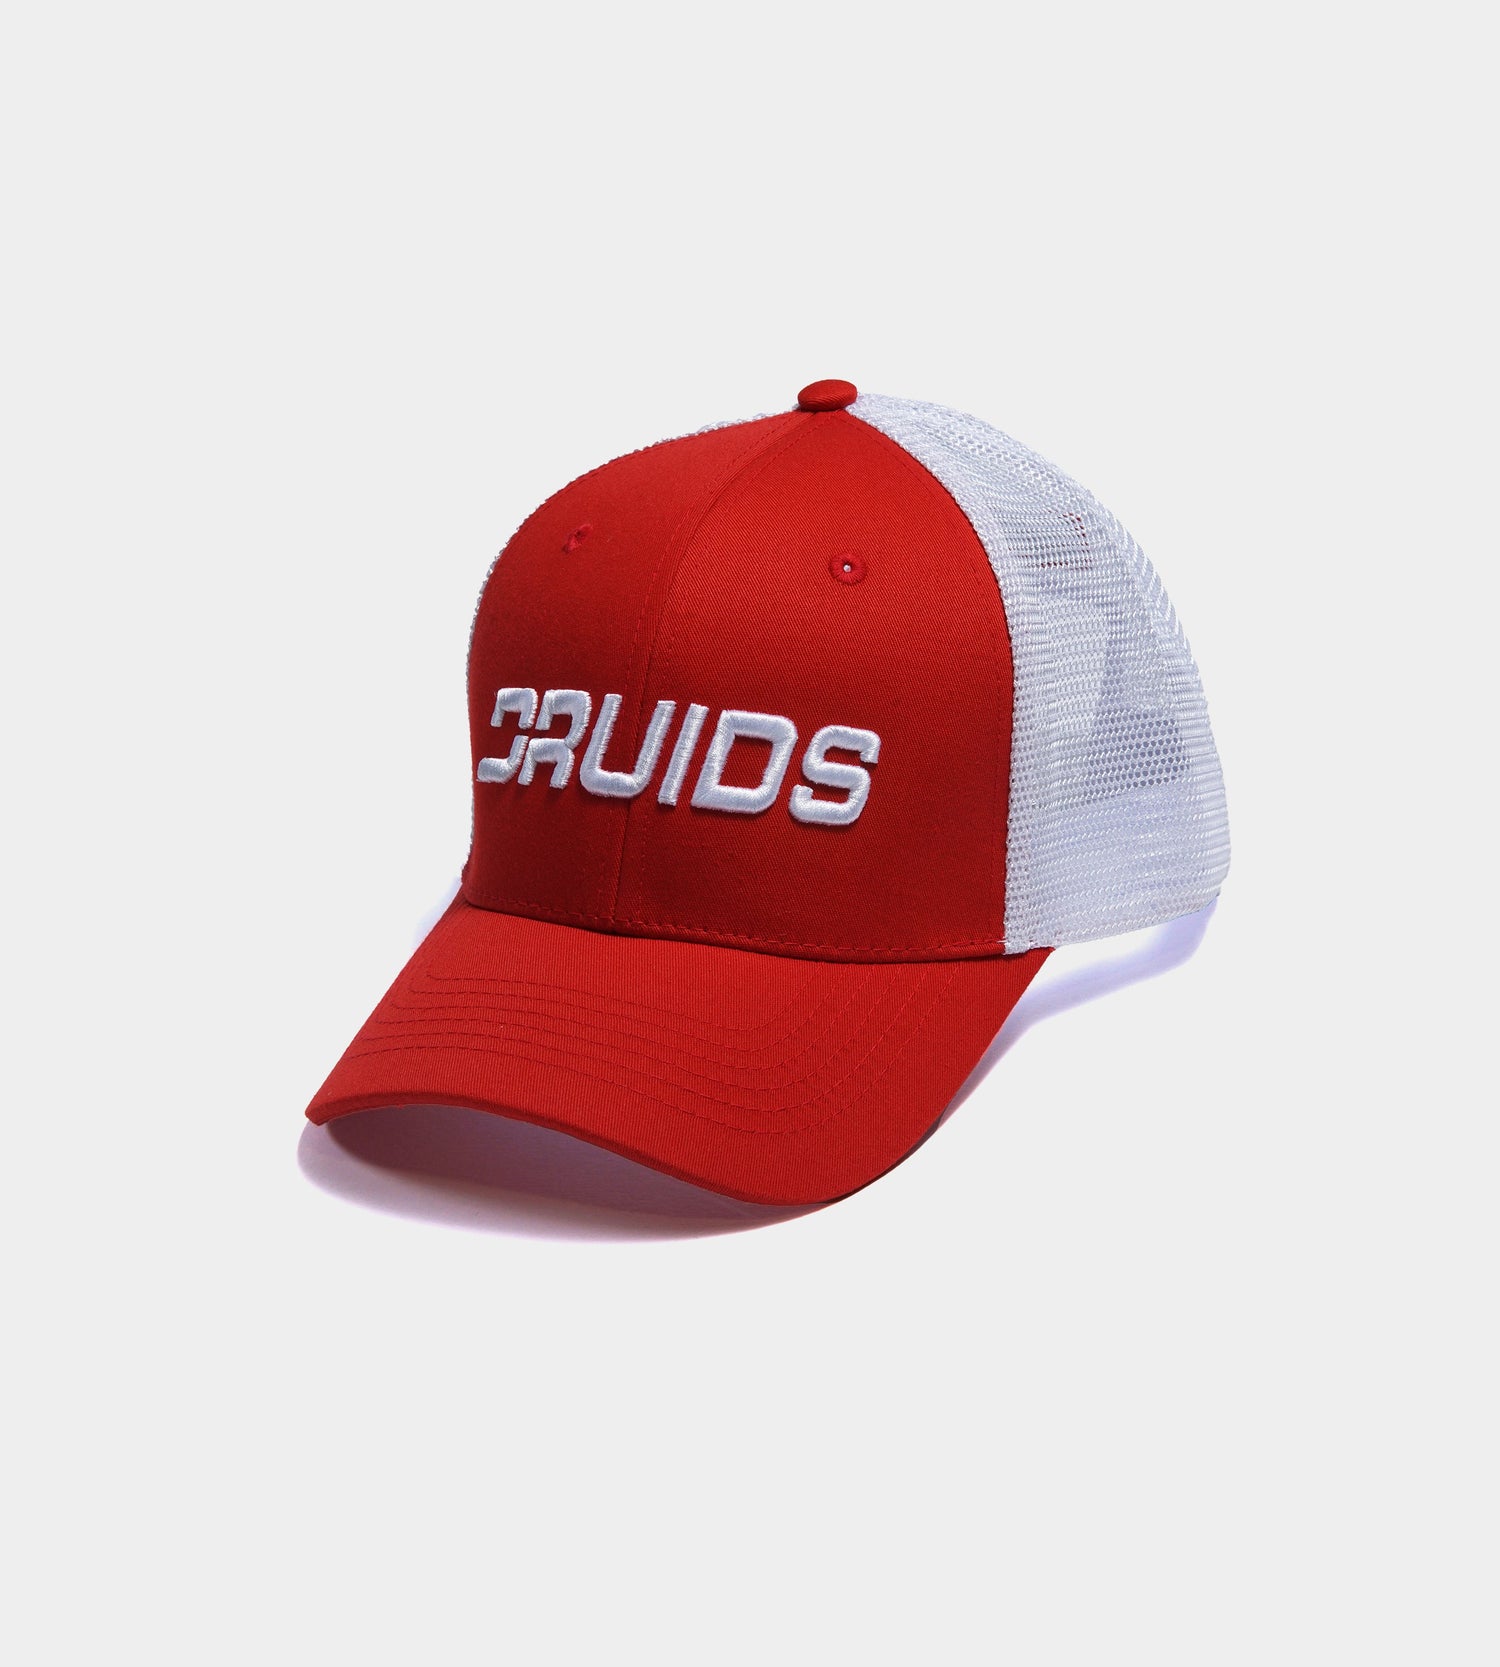 PLAYERS CAP - RED / WHITE - DRUIDS